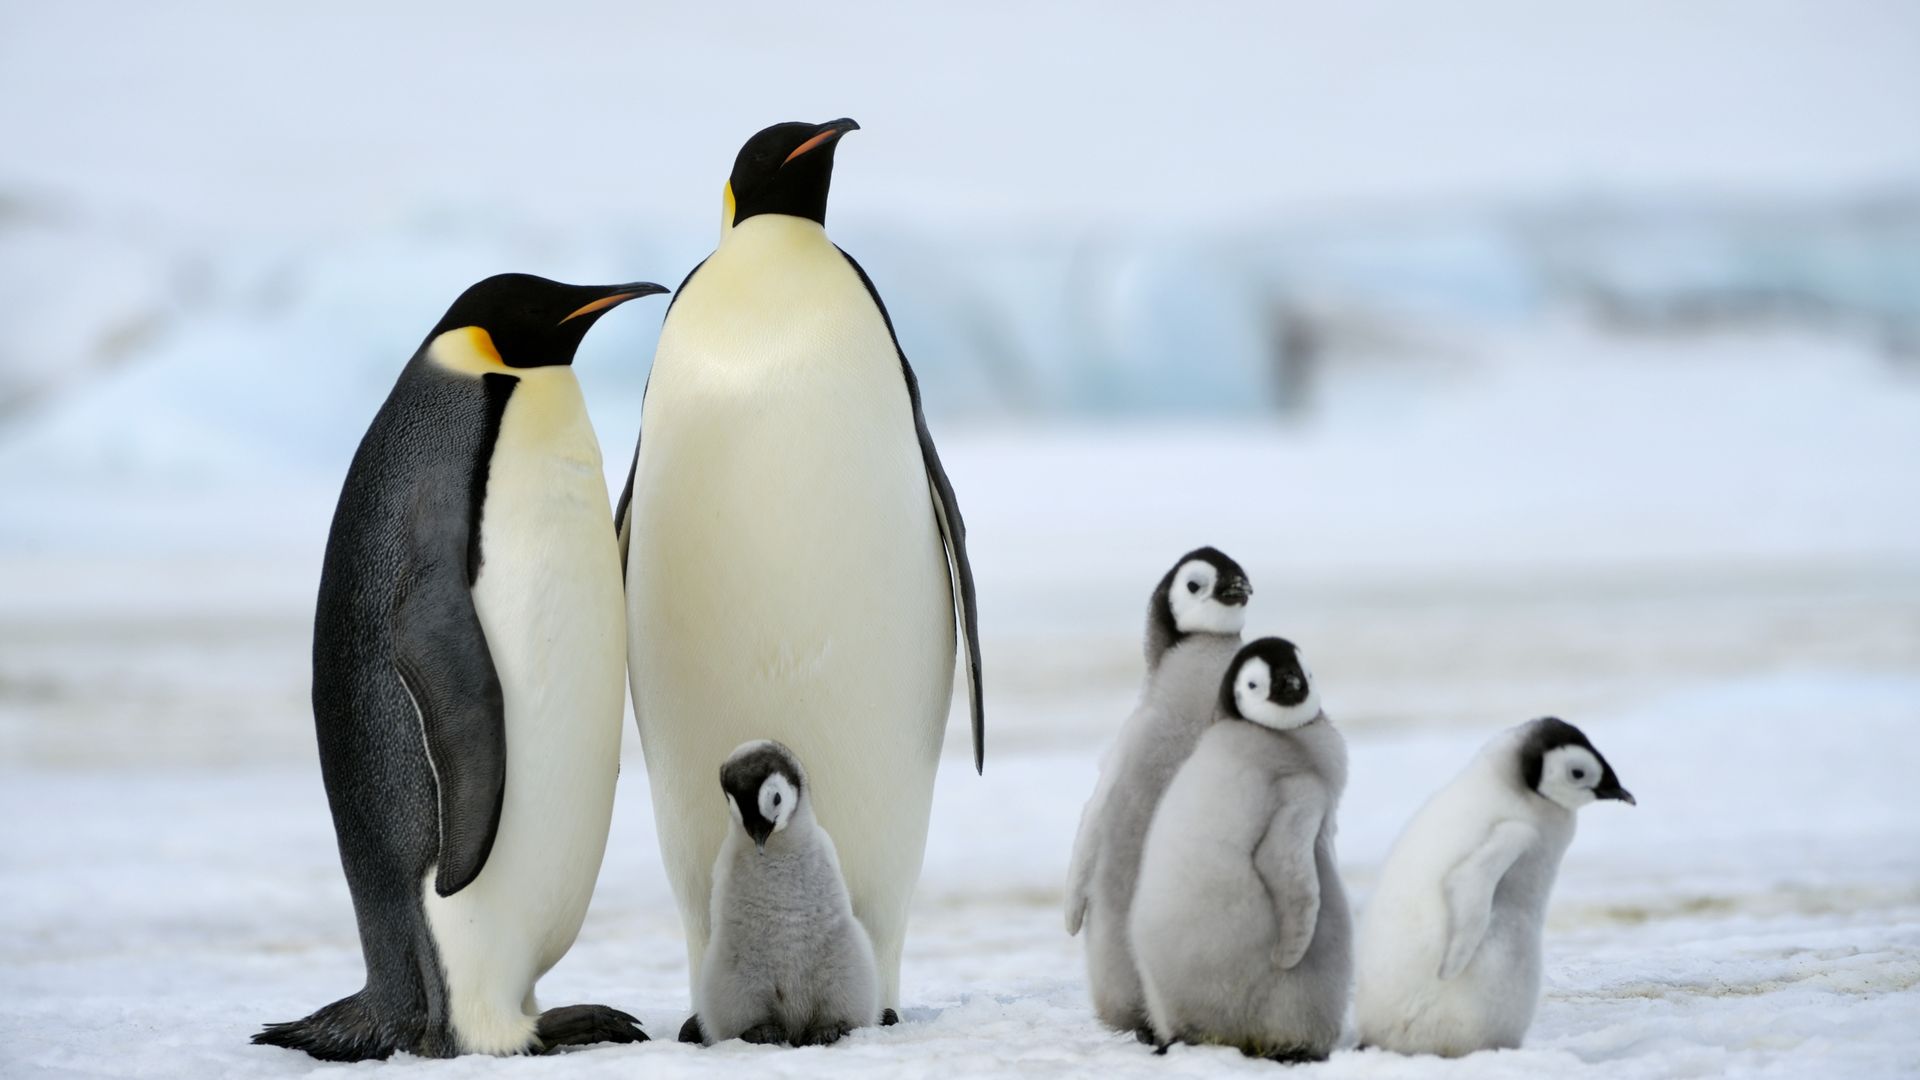 Scientists have announced a "catastrophic" breeding failure at one of world’s largest emperor penguin colonies.